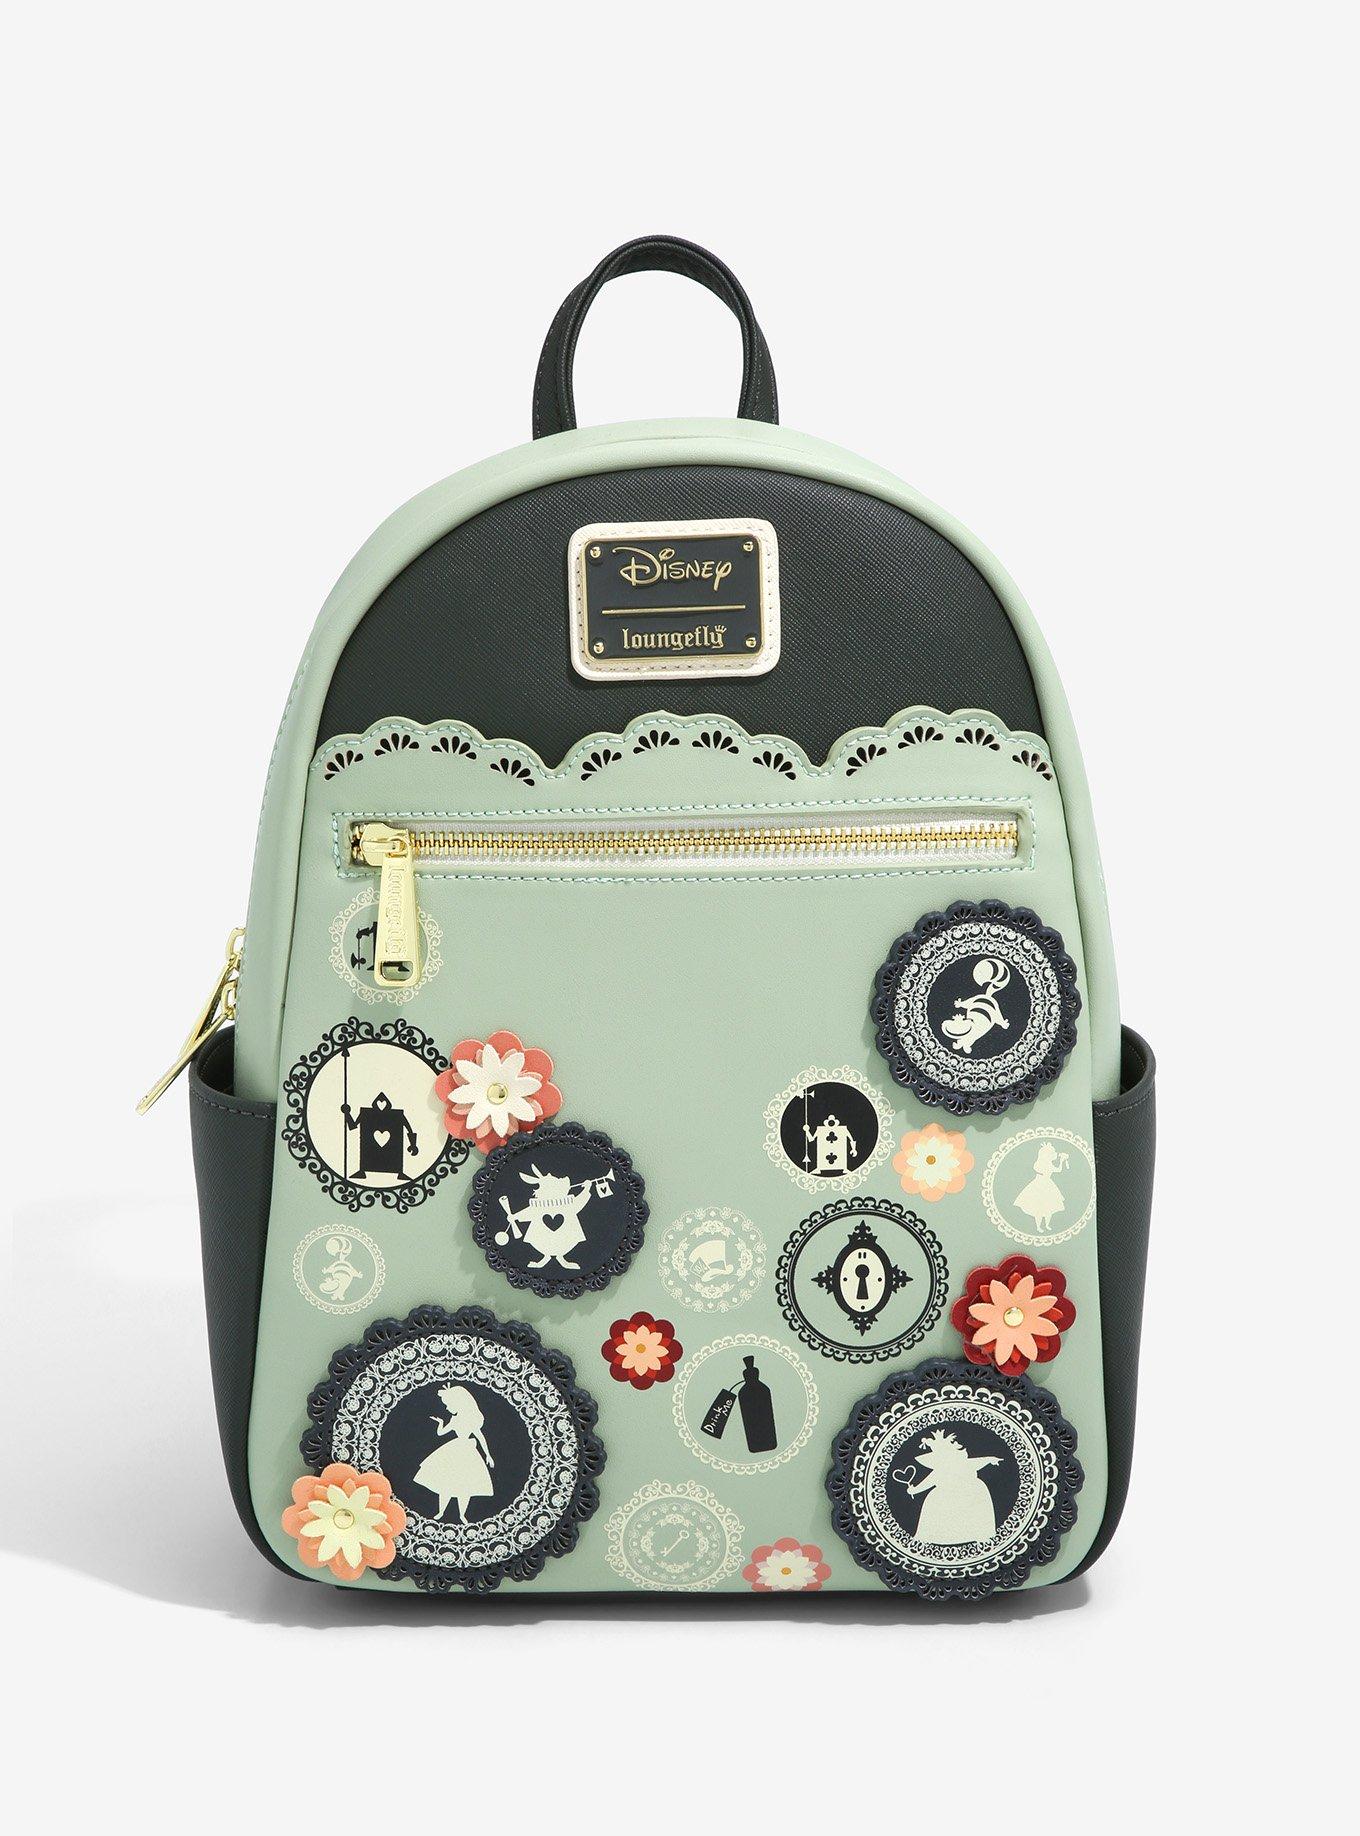 Alice in Wonderland Cameo Mini Backpack | Officially Licensed | Plastic/Vegan Leather | Loungefly